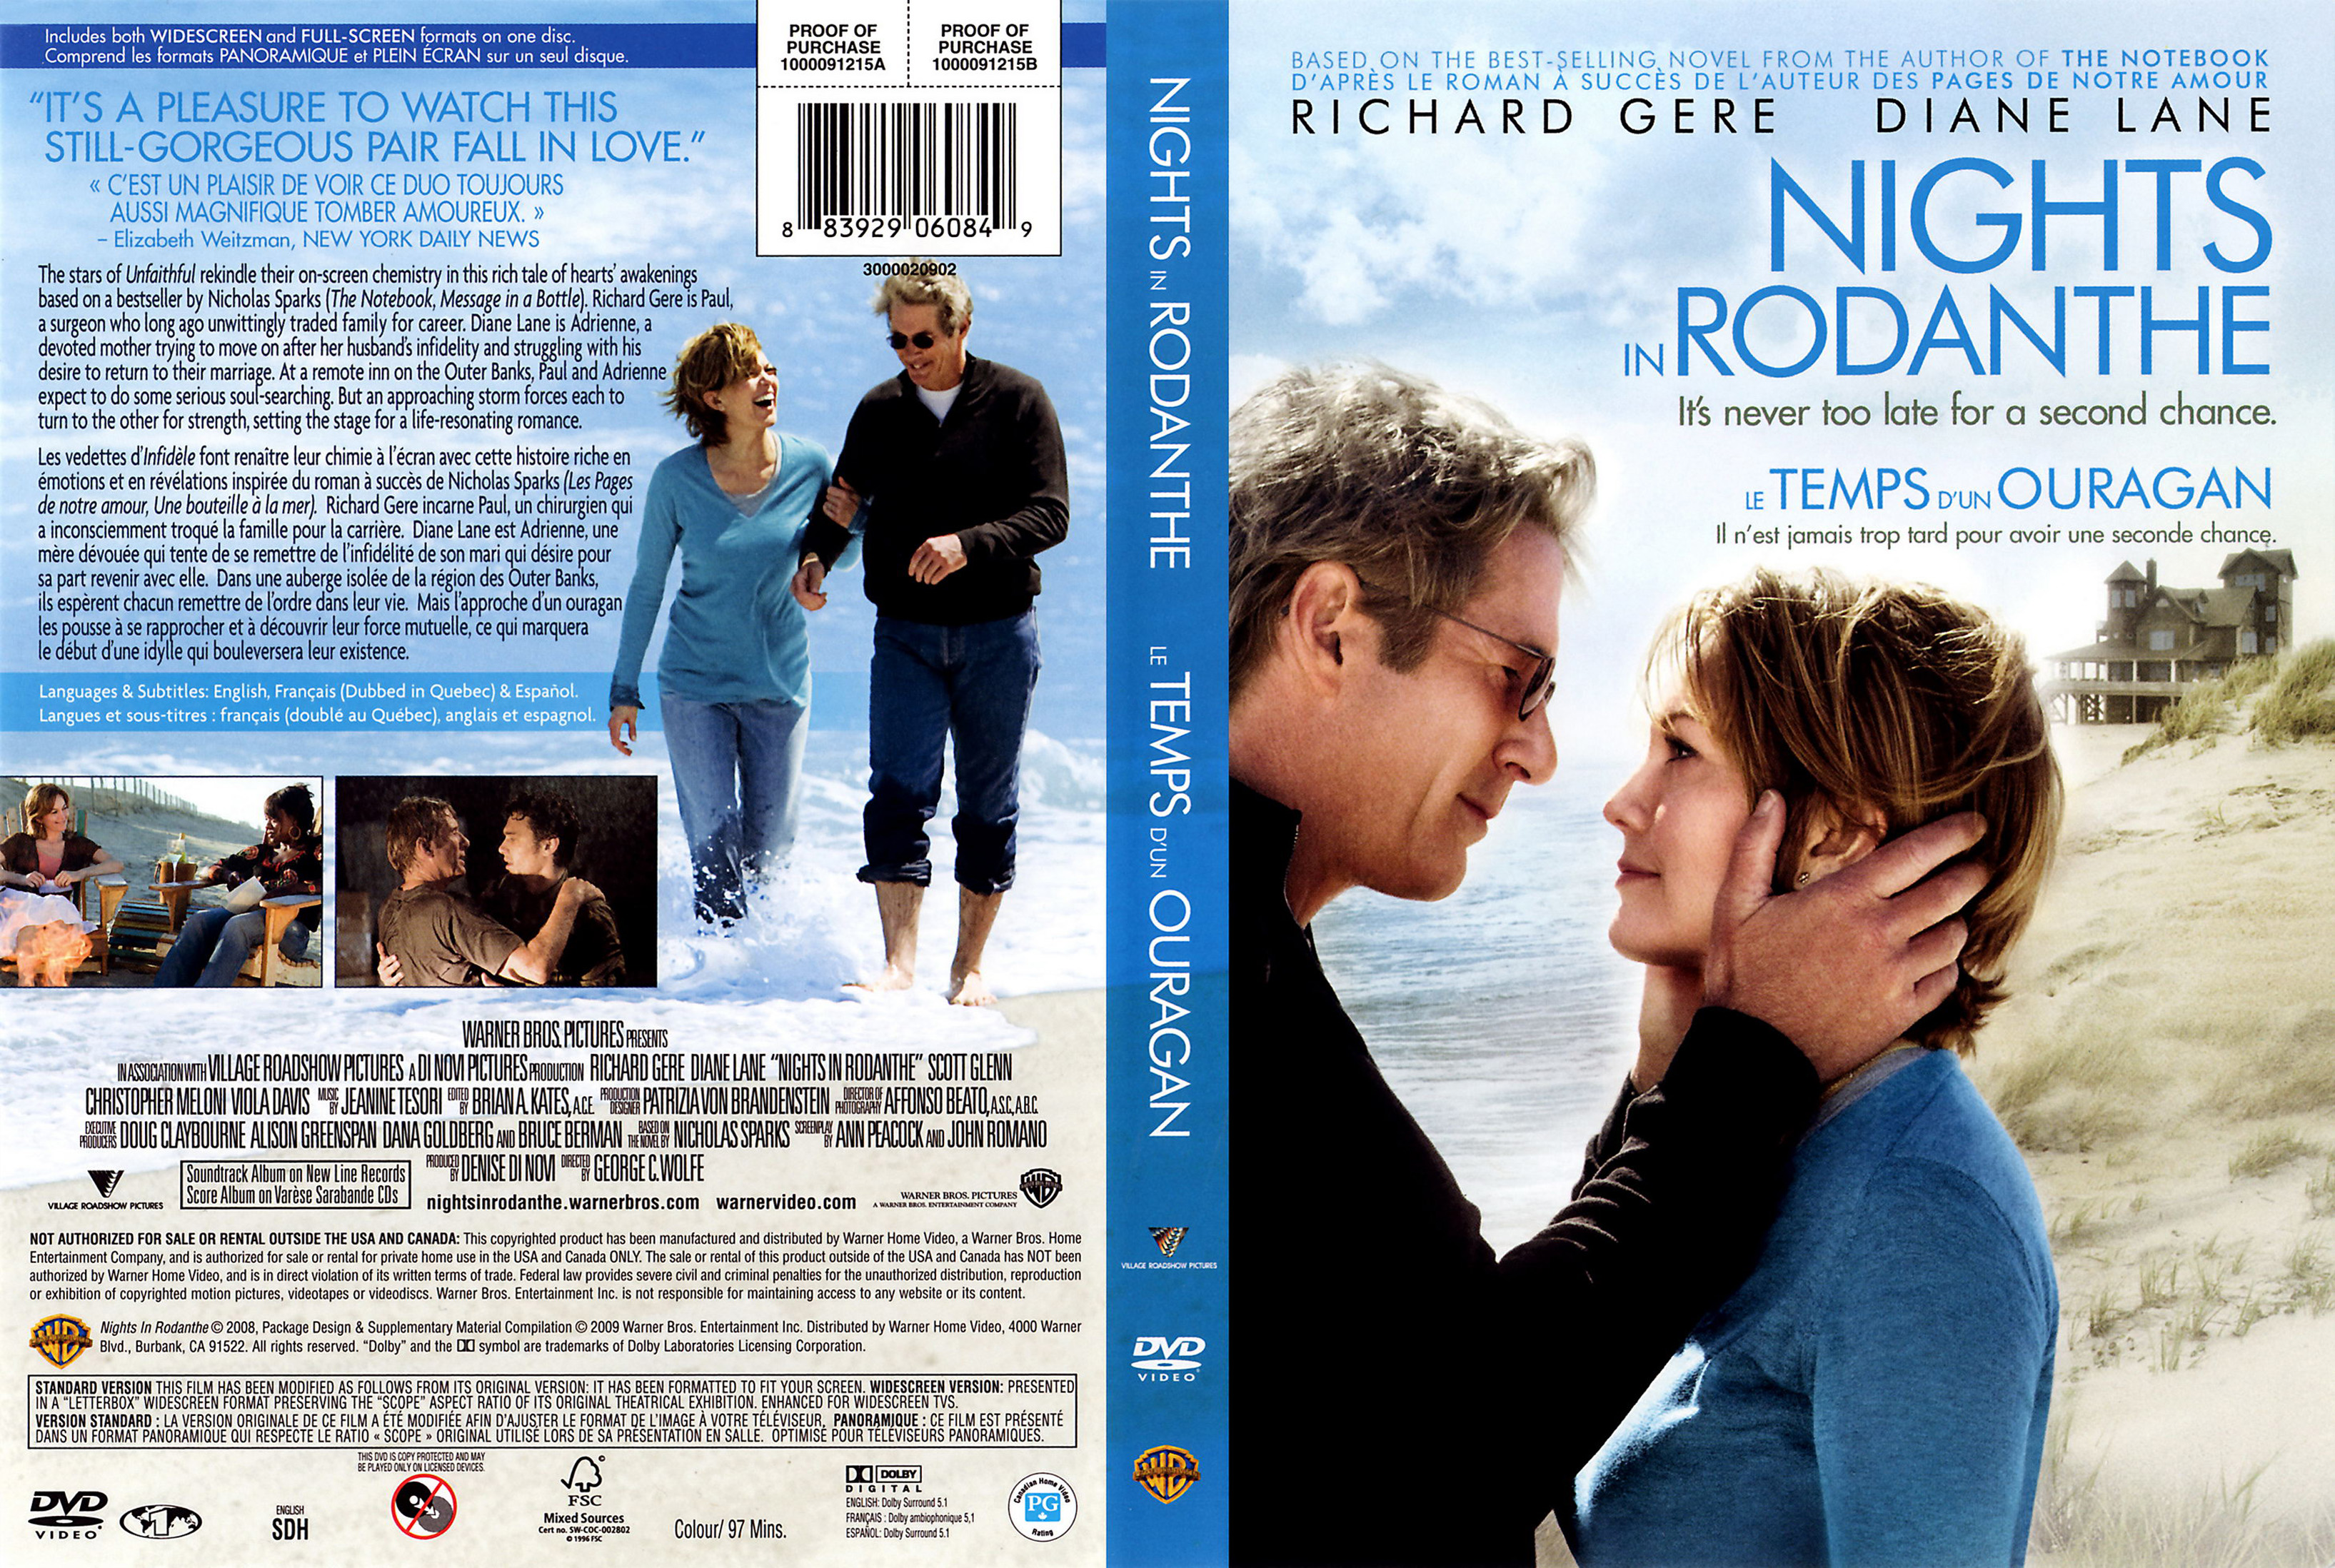 Jaquette DVD Nights in rodanthe - Le temps d